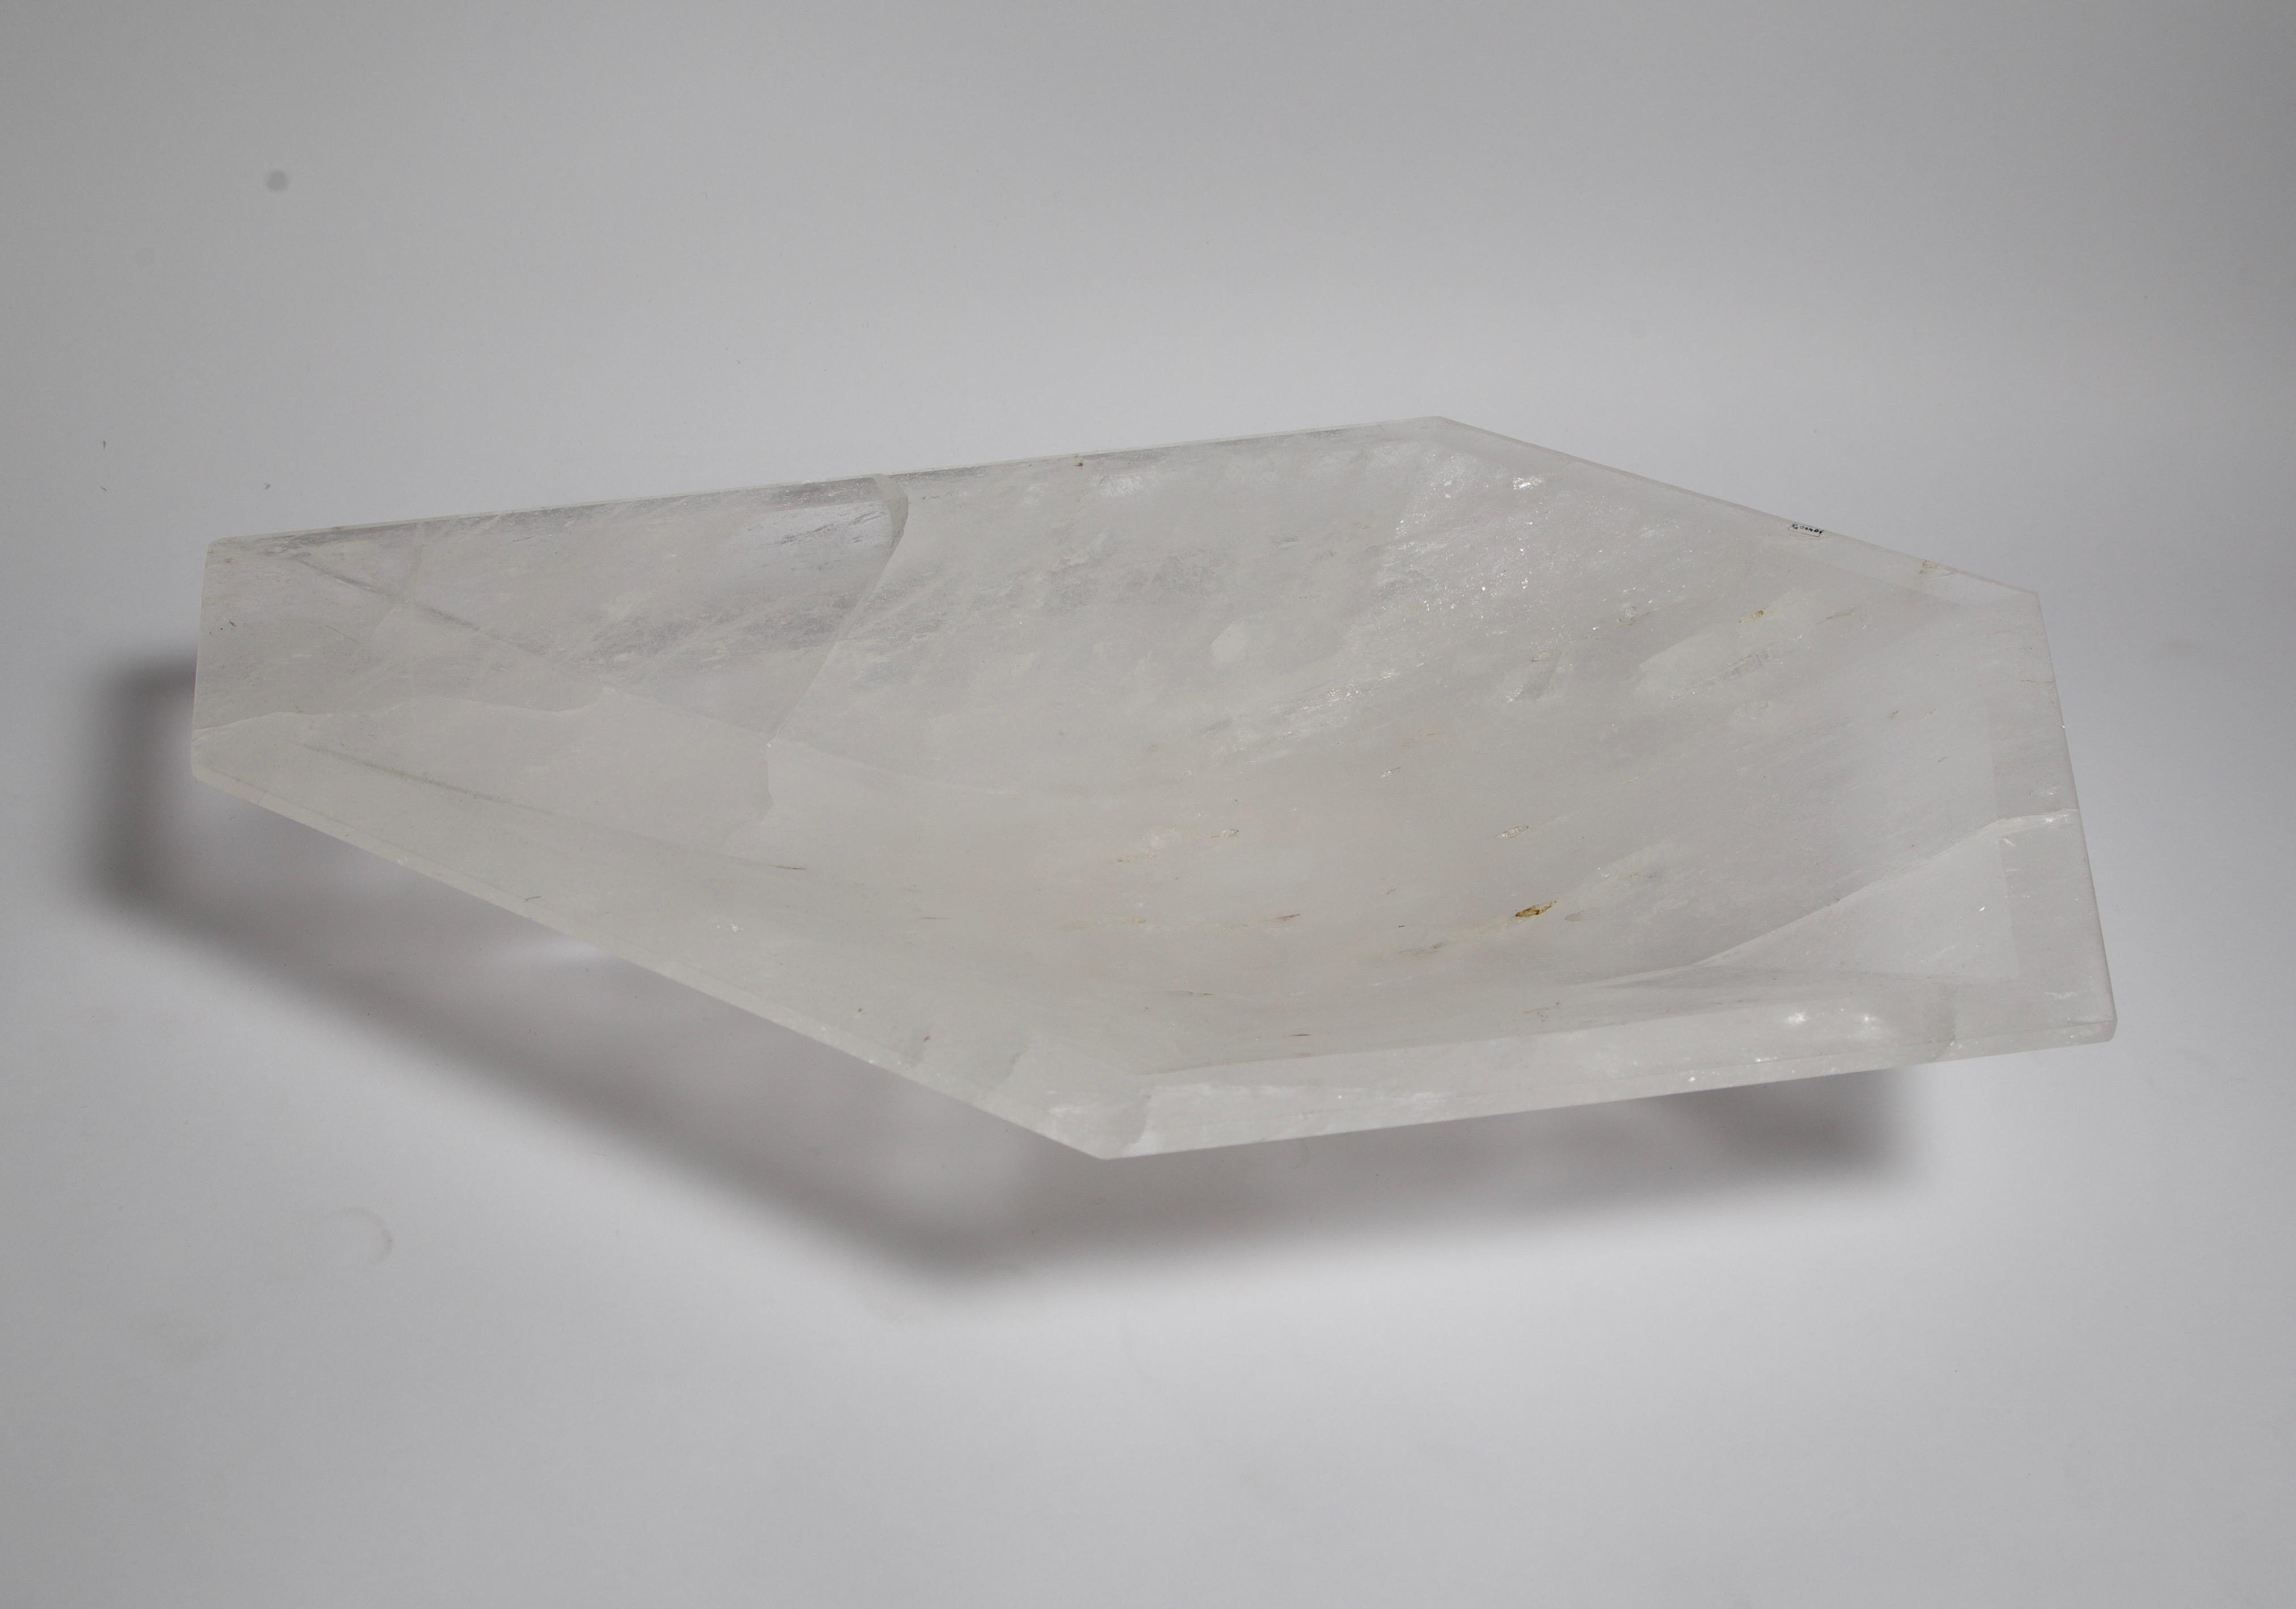 Large Abstract Geometric Solid Quartz Bowl was carved from a solid slab of the finest Quartz by master artisans. The abstract quartz bowl is a piece of art and can be lit either from above or below to show the transparency of the quartz. There are